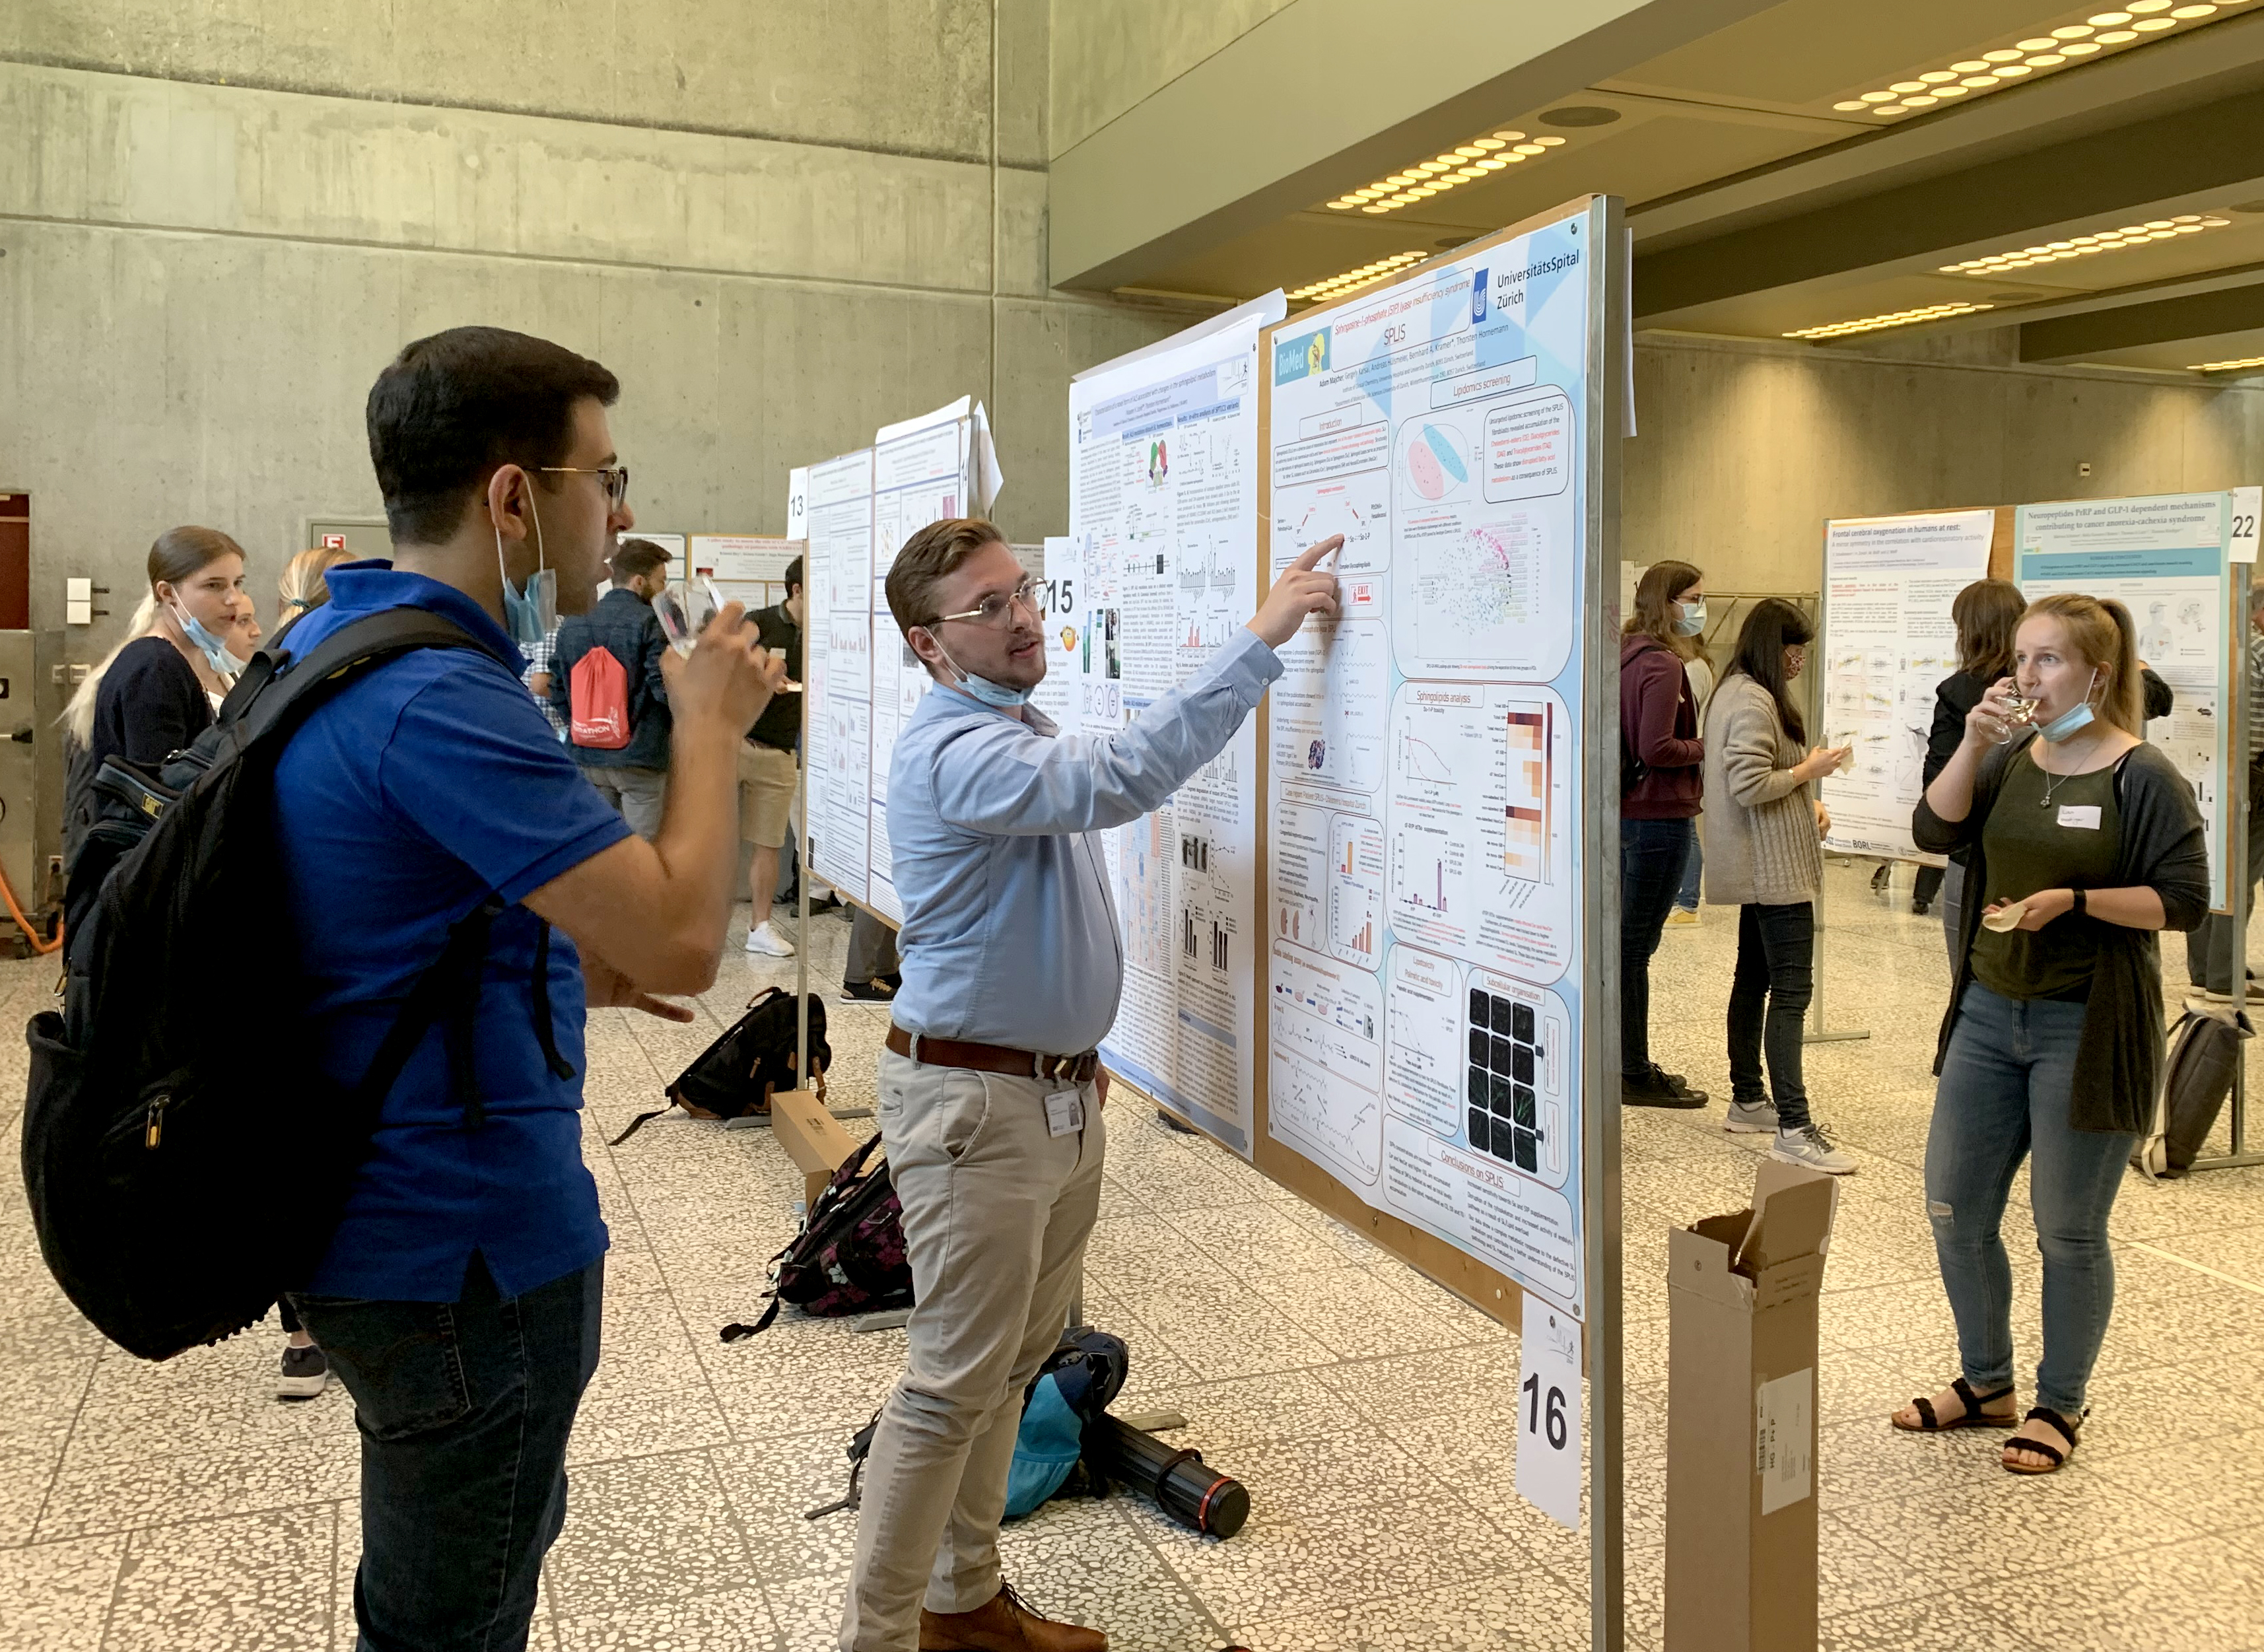 Vivid discussions during the poster session